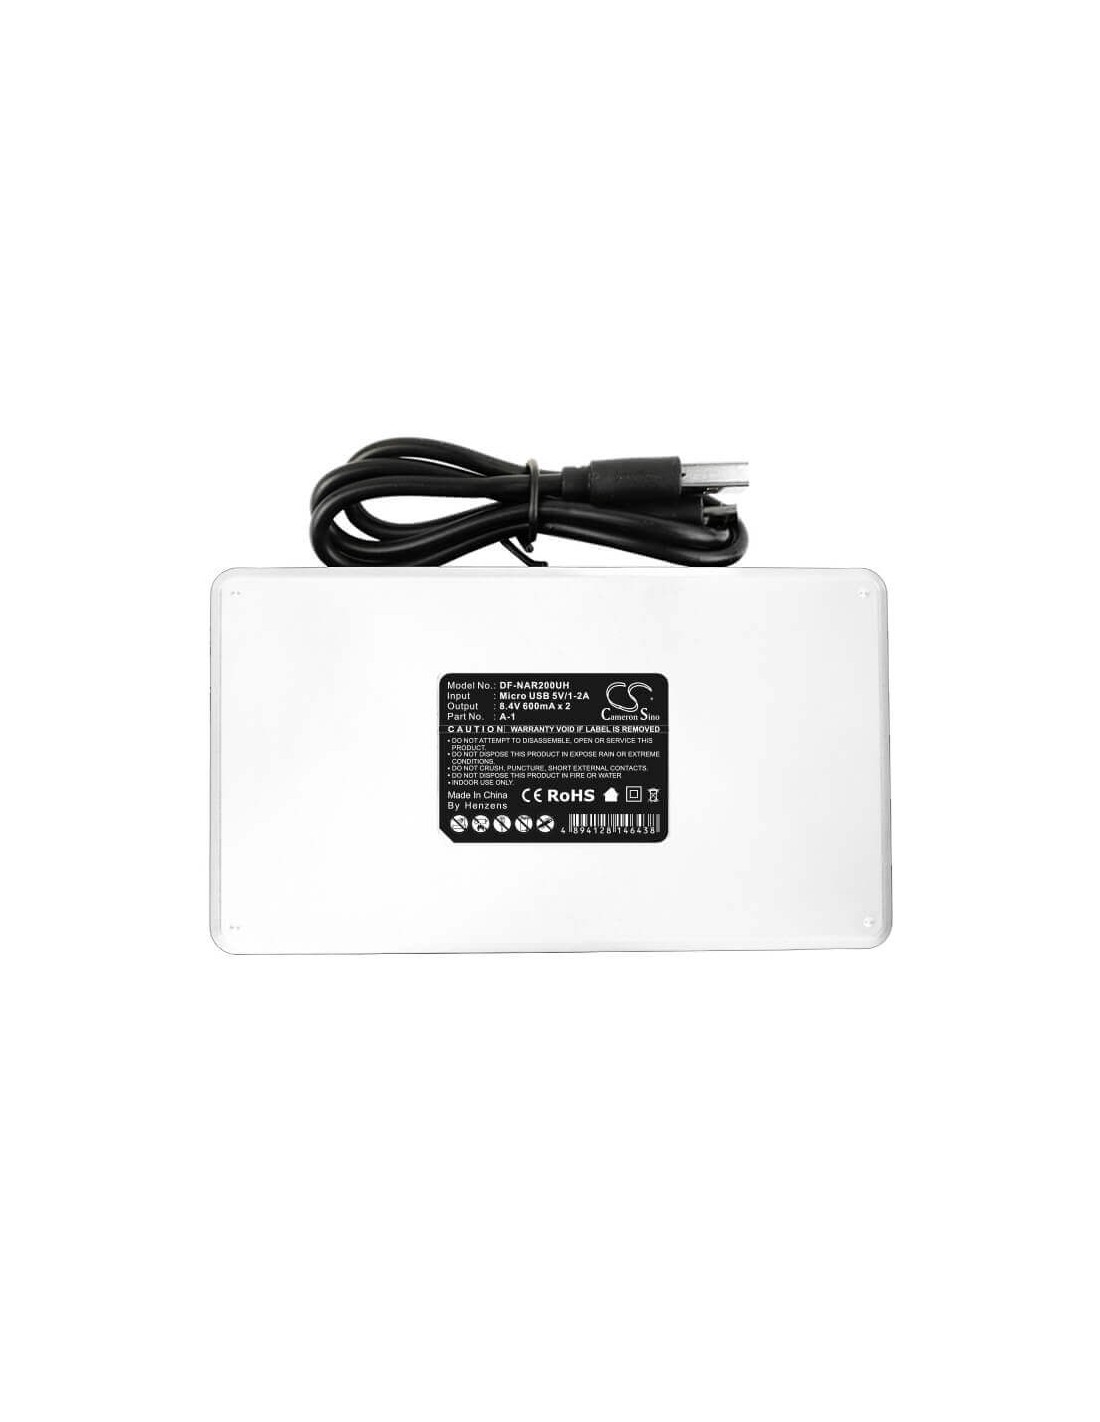 Battery Charger for Arlo, Pro, Pro 2, Vmc4030